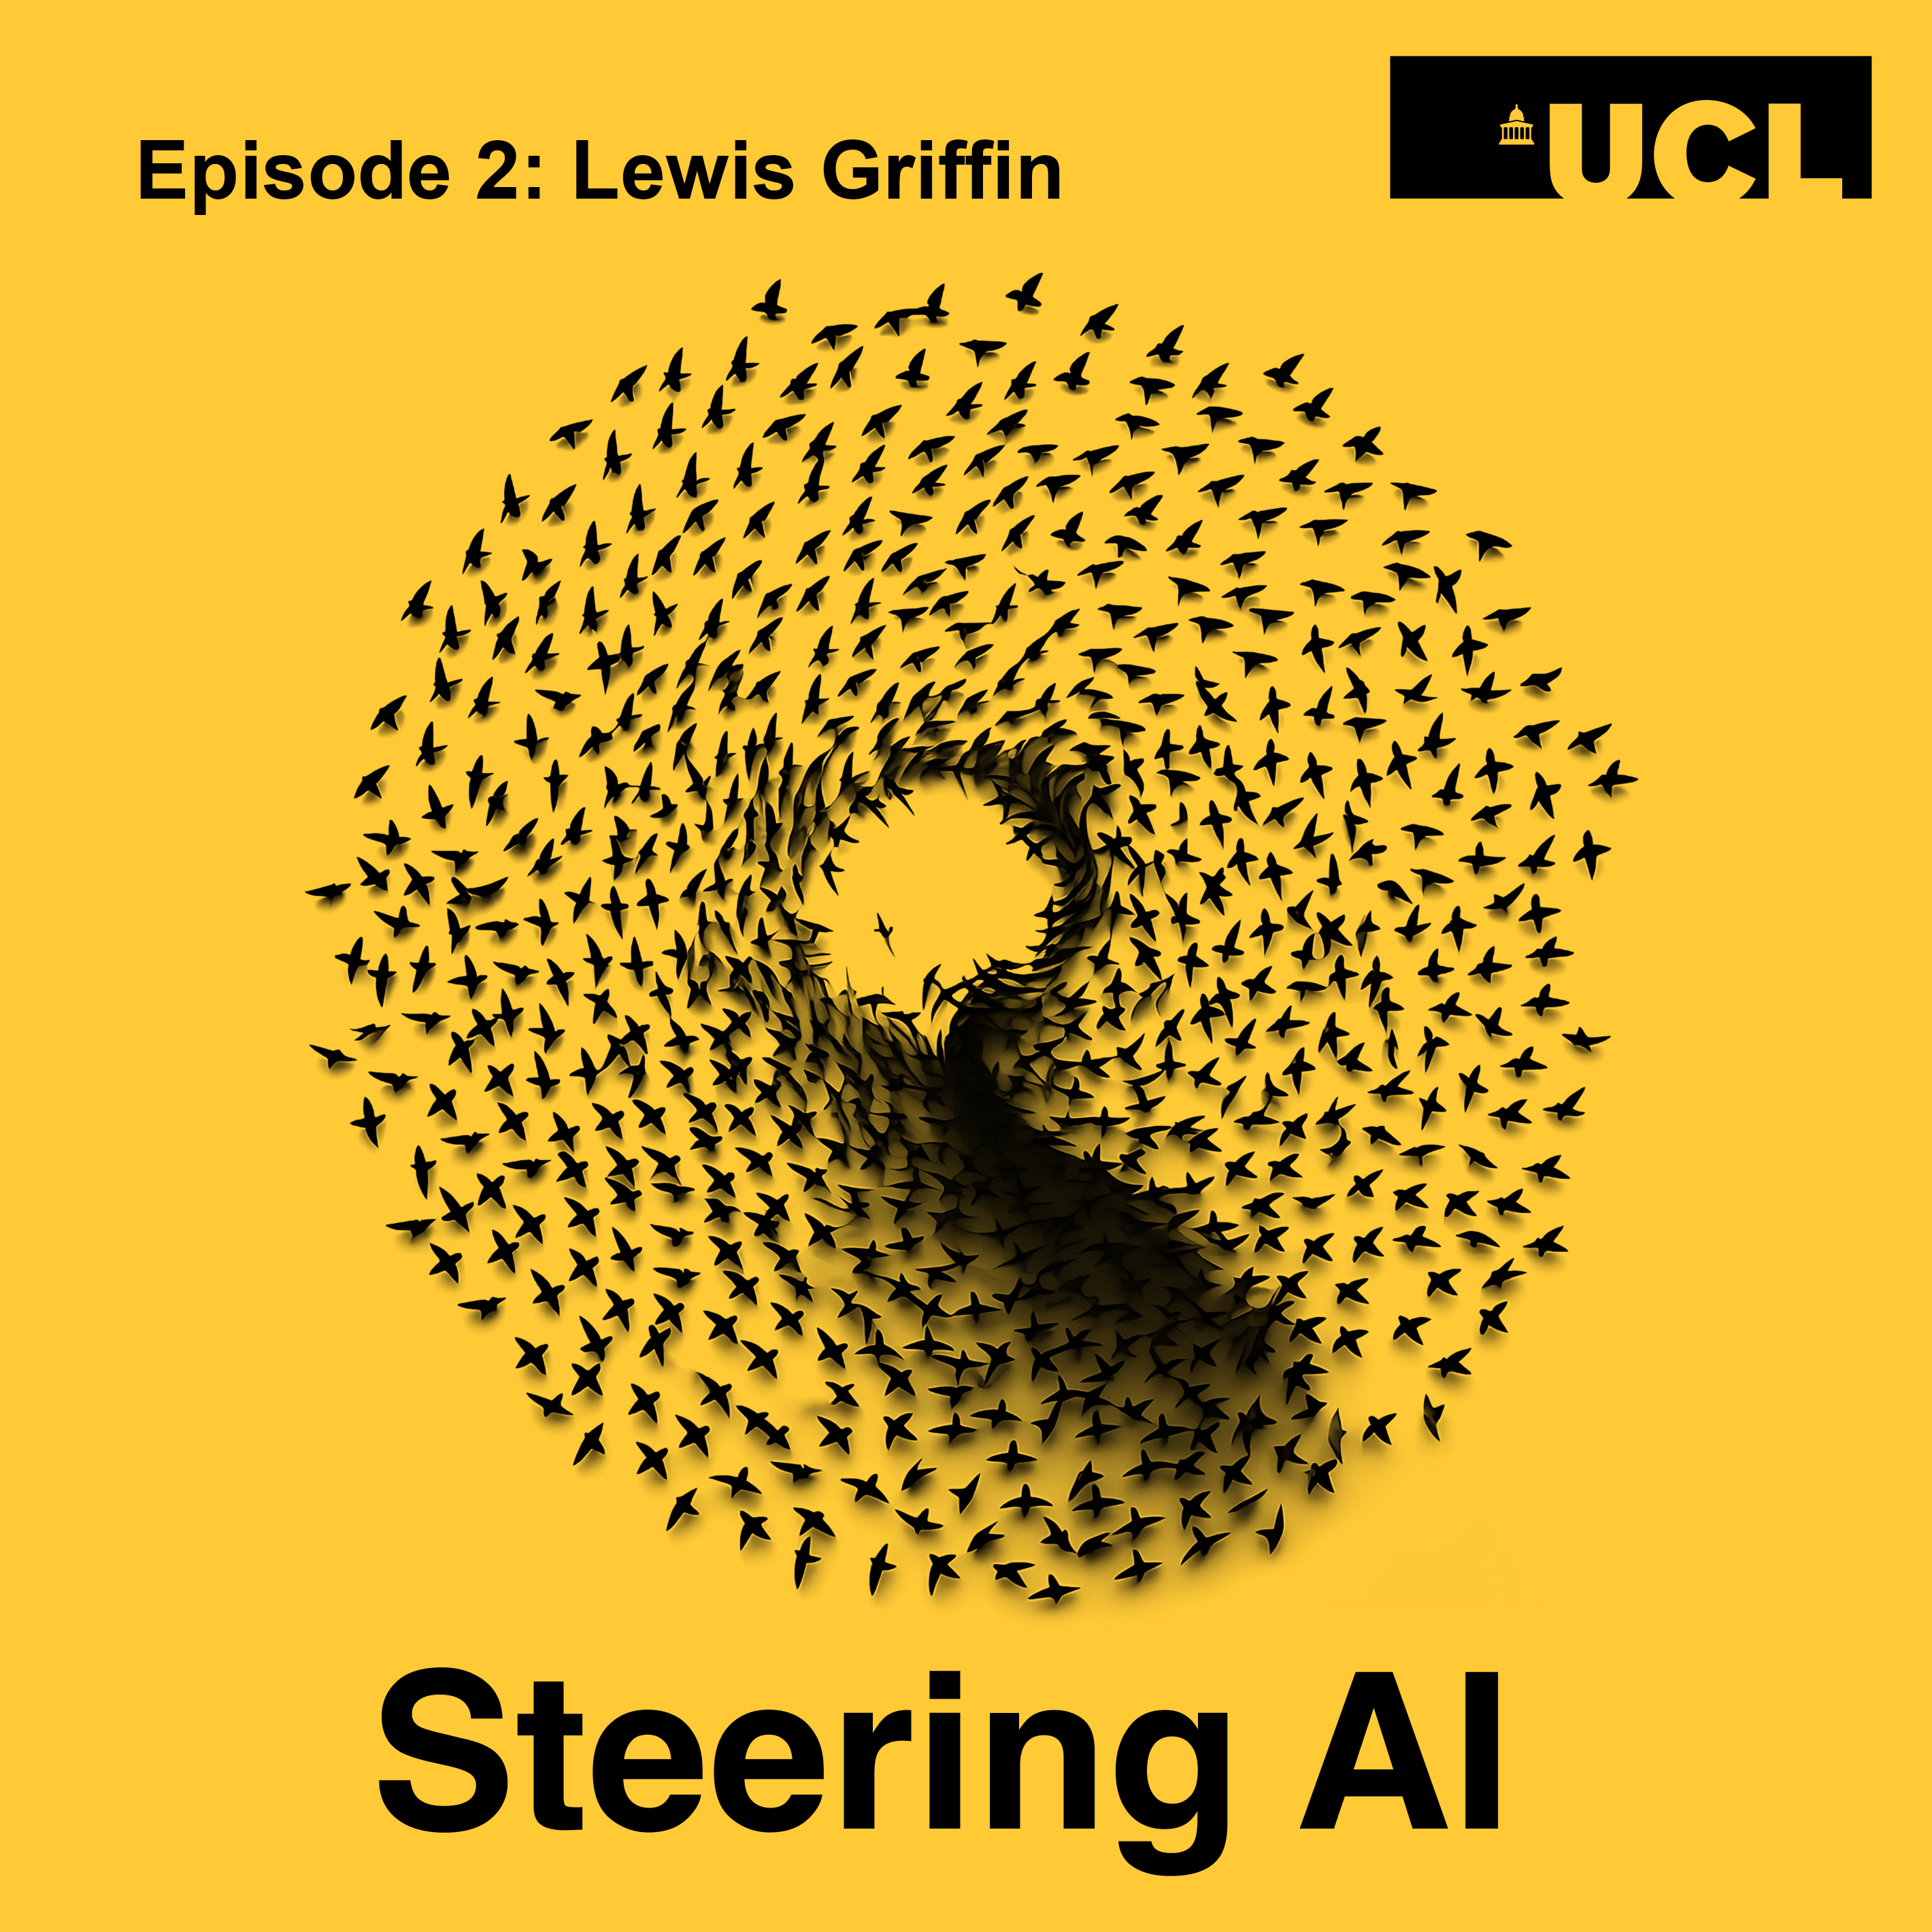 Steering AI podcast - Lewis Griffin